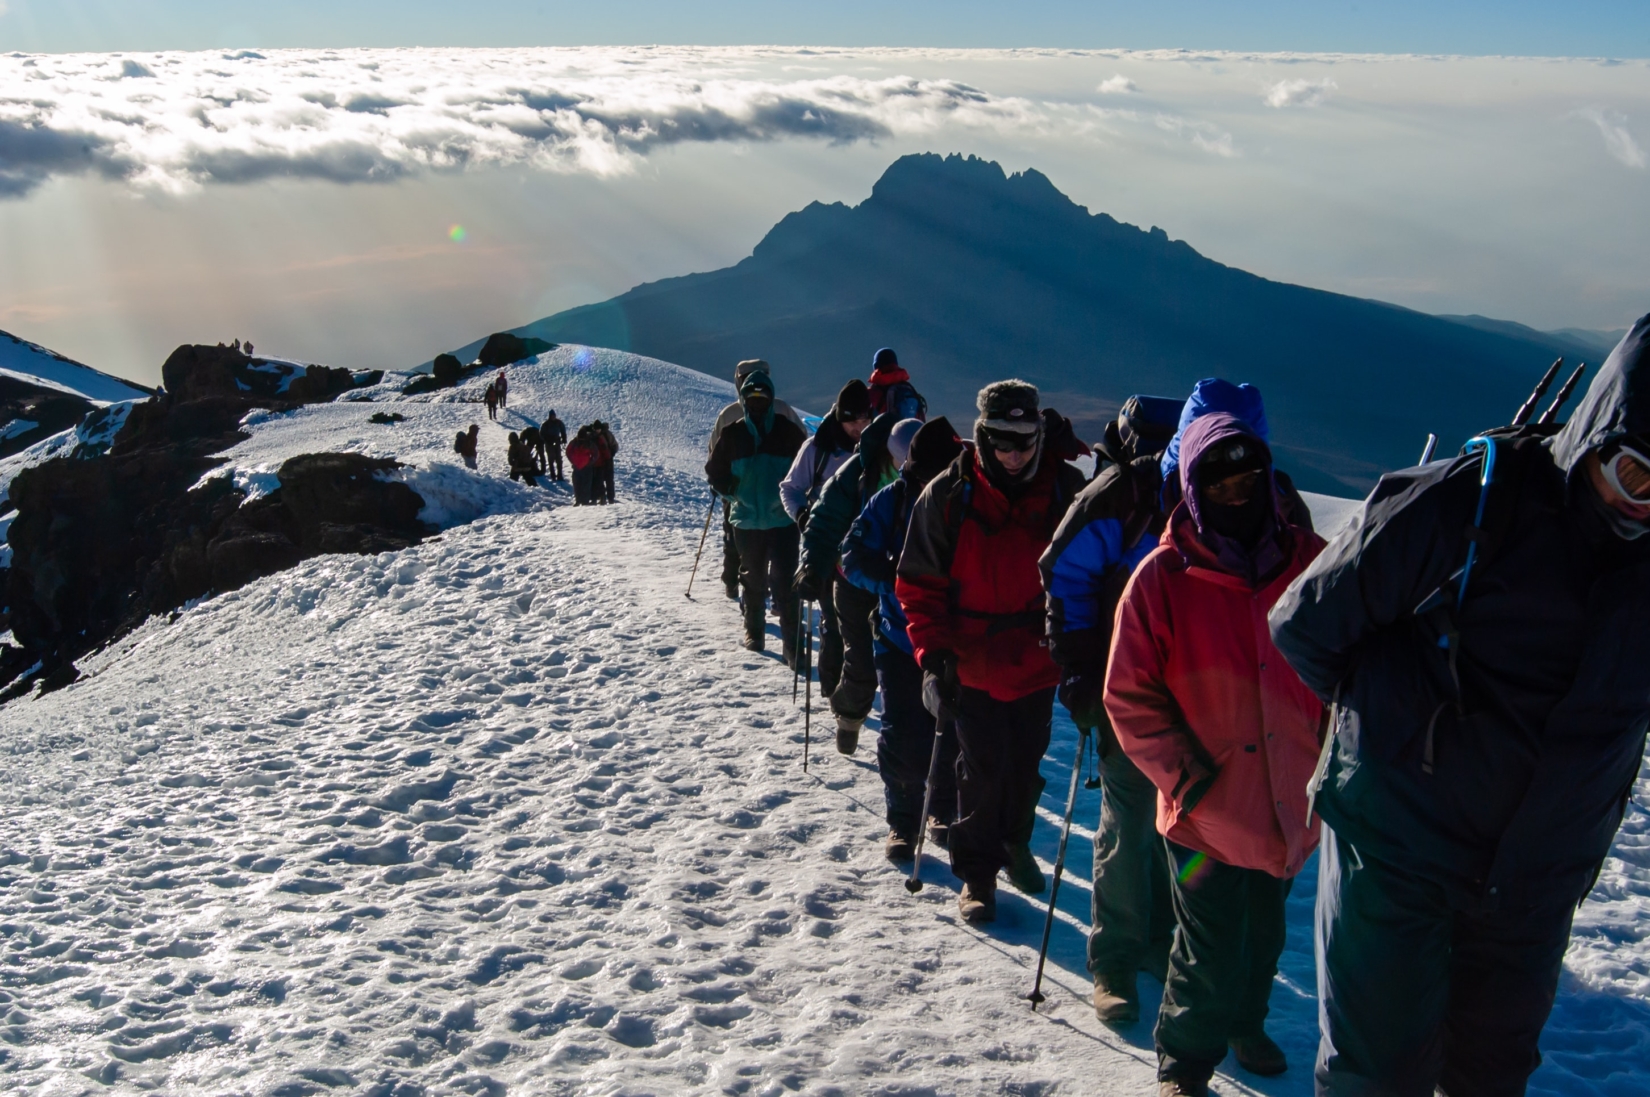 A single line of trekkers climbing a snow-covered mountain above the clouds